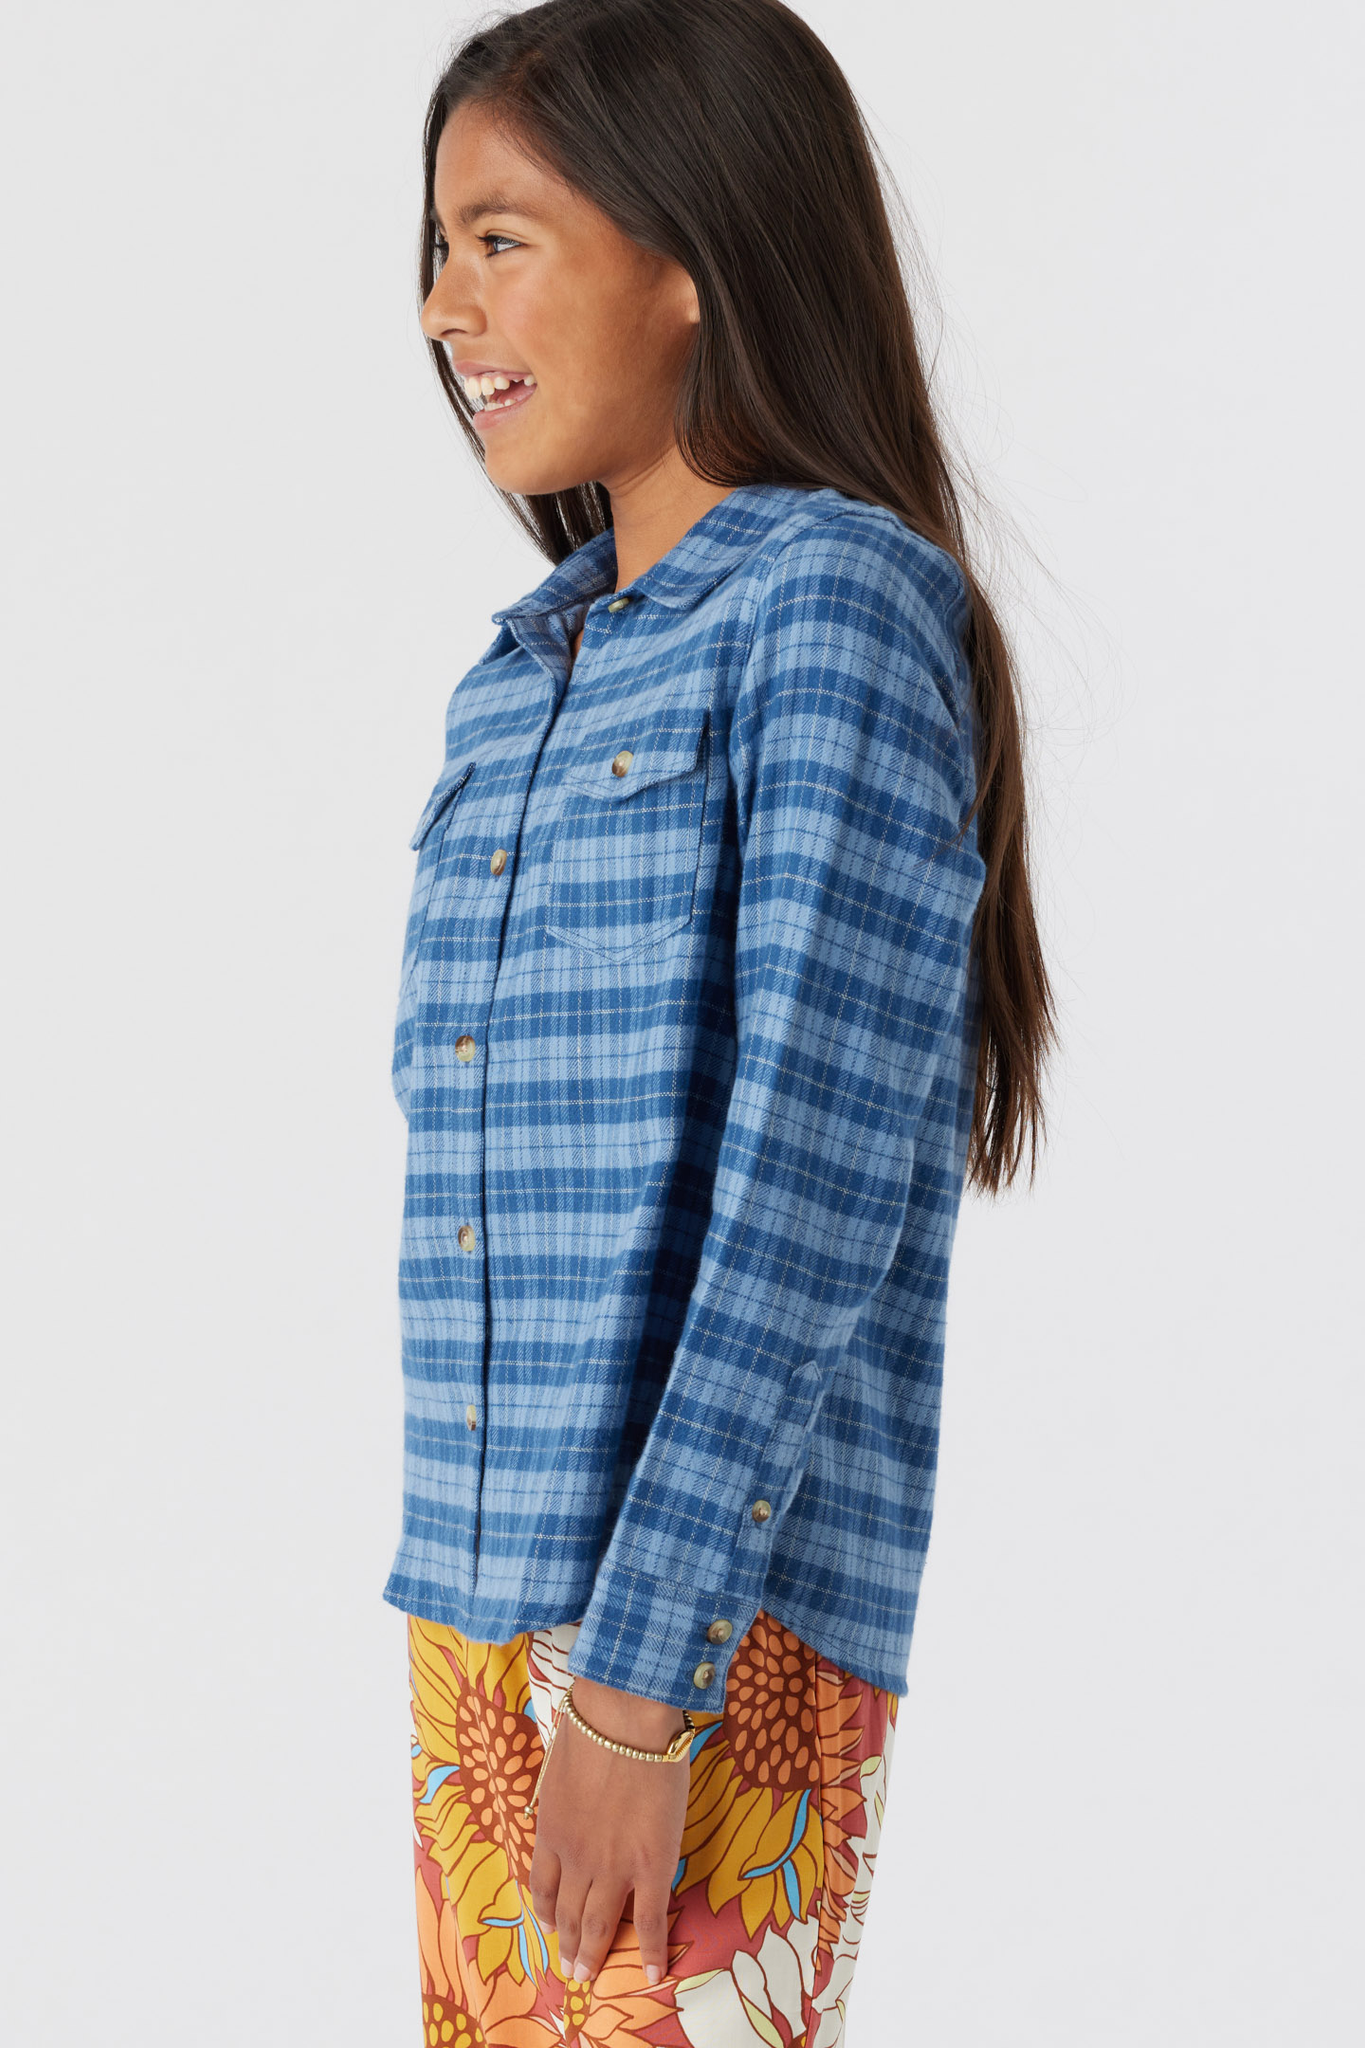 GIRL'S LONNIE FLANNEL